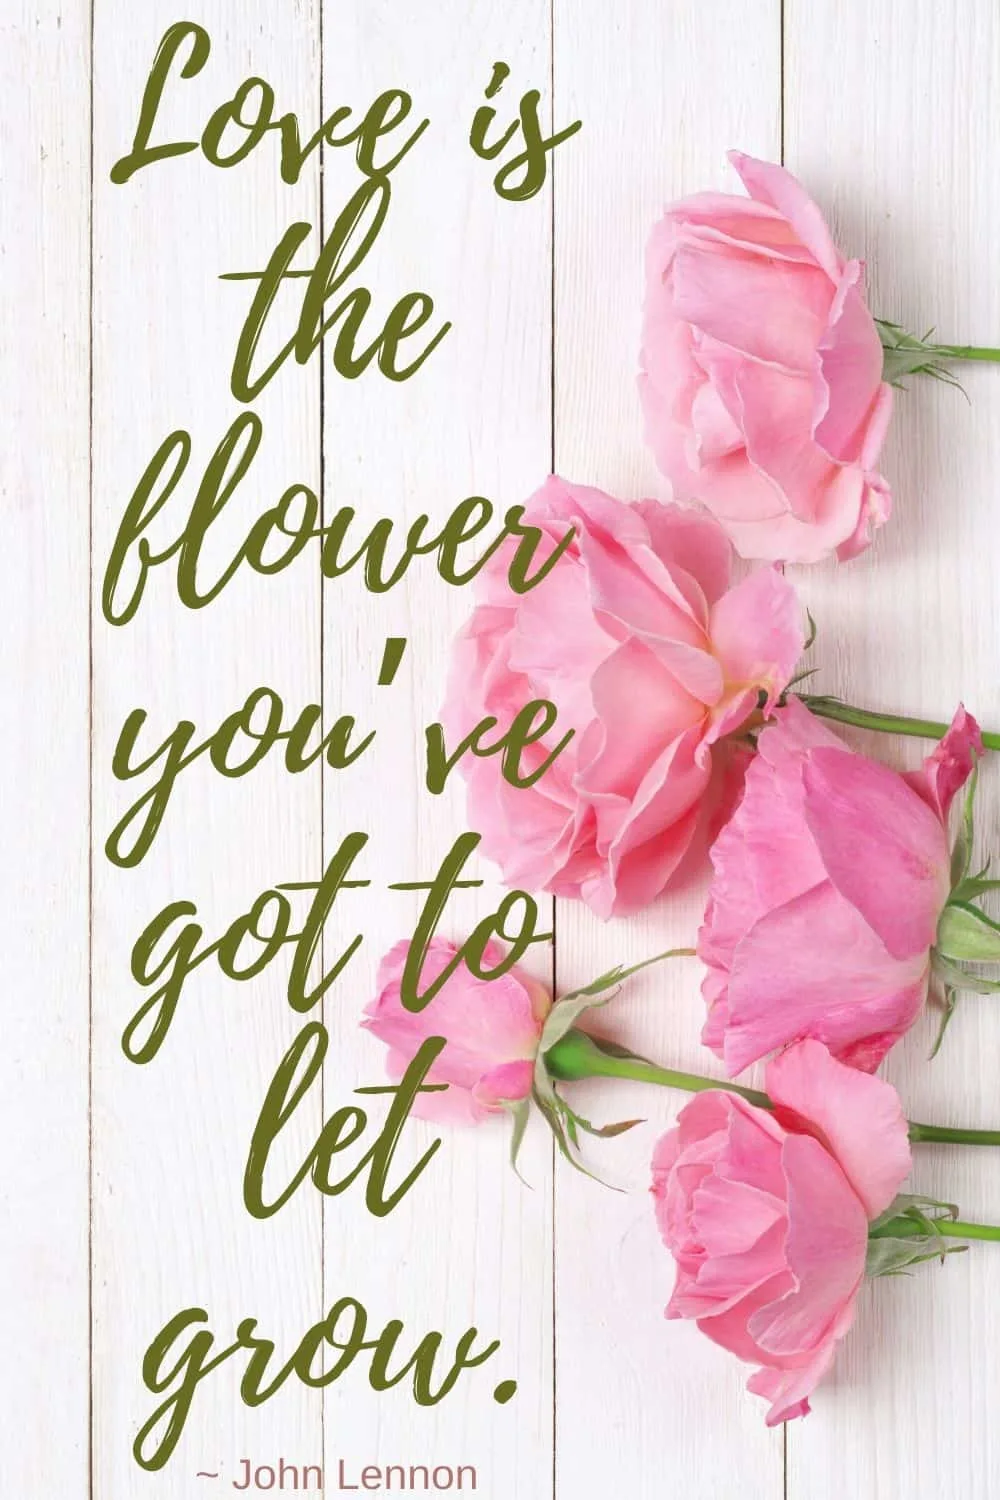 Love is the flower you’ve got to let grow.